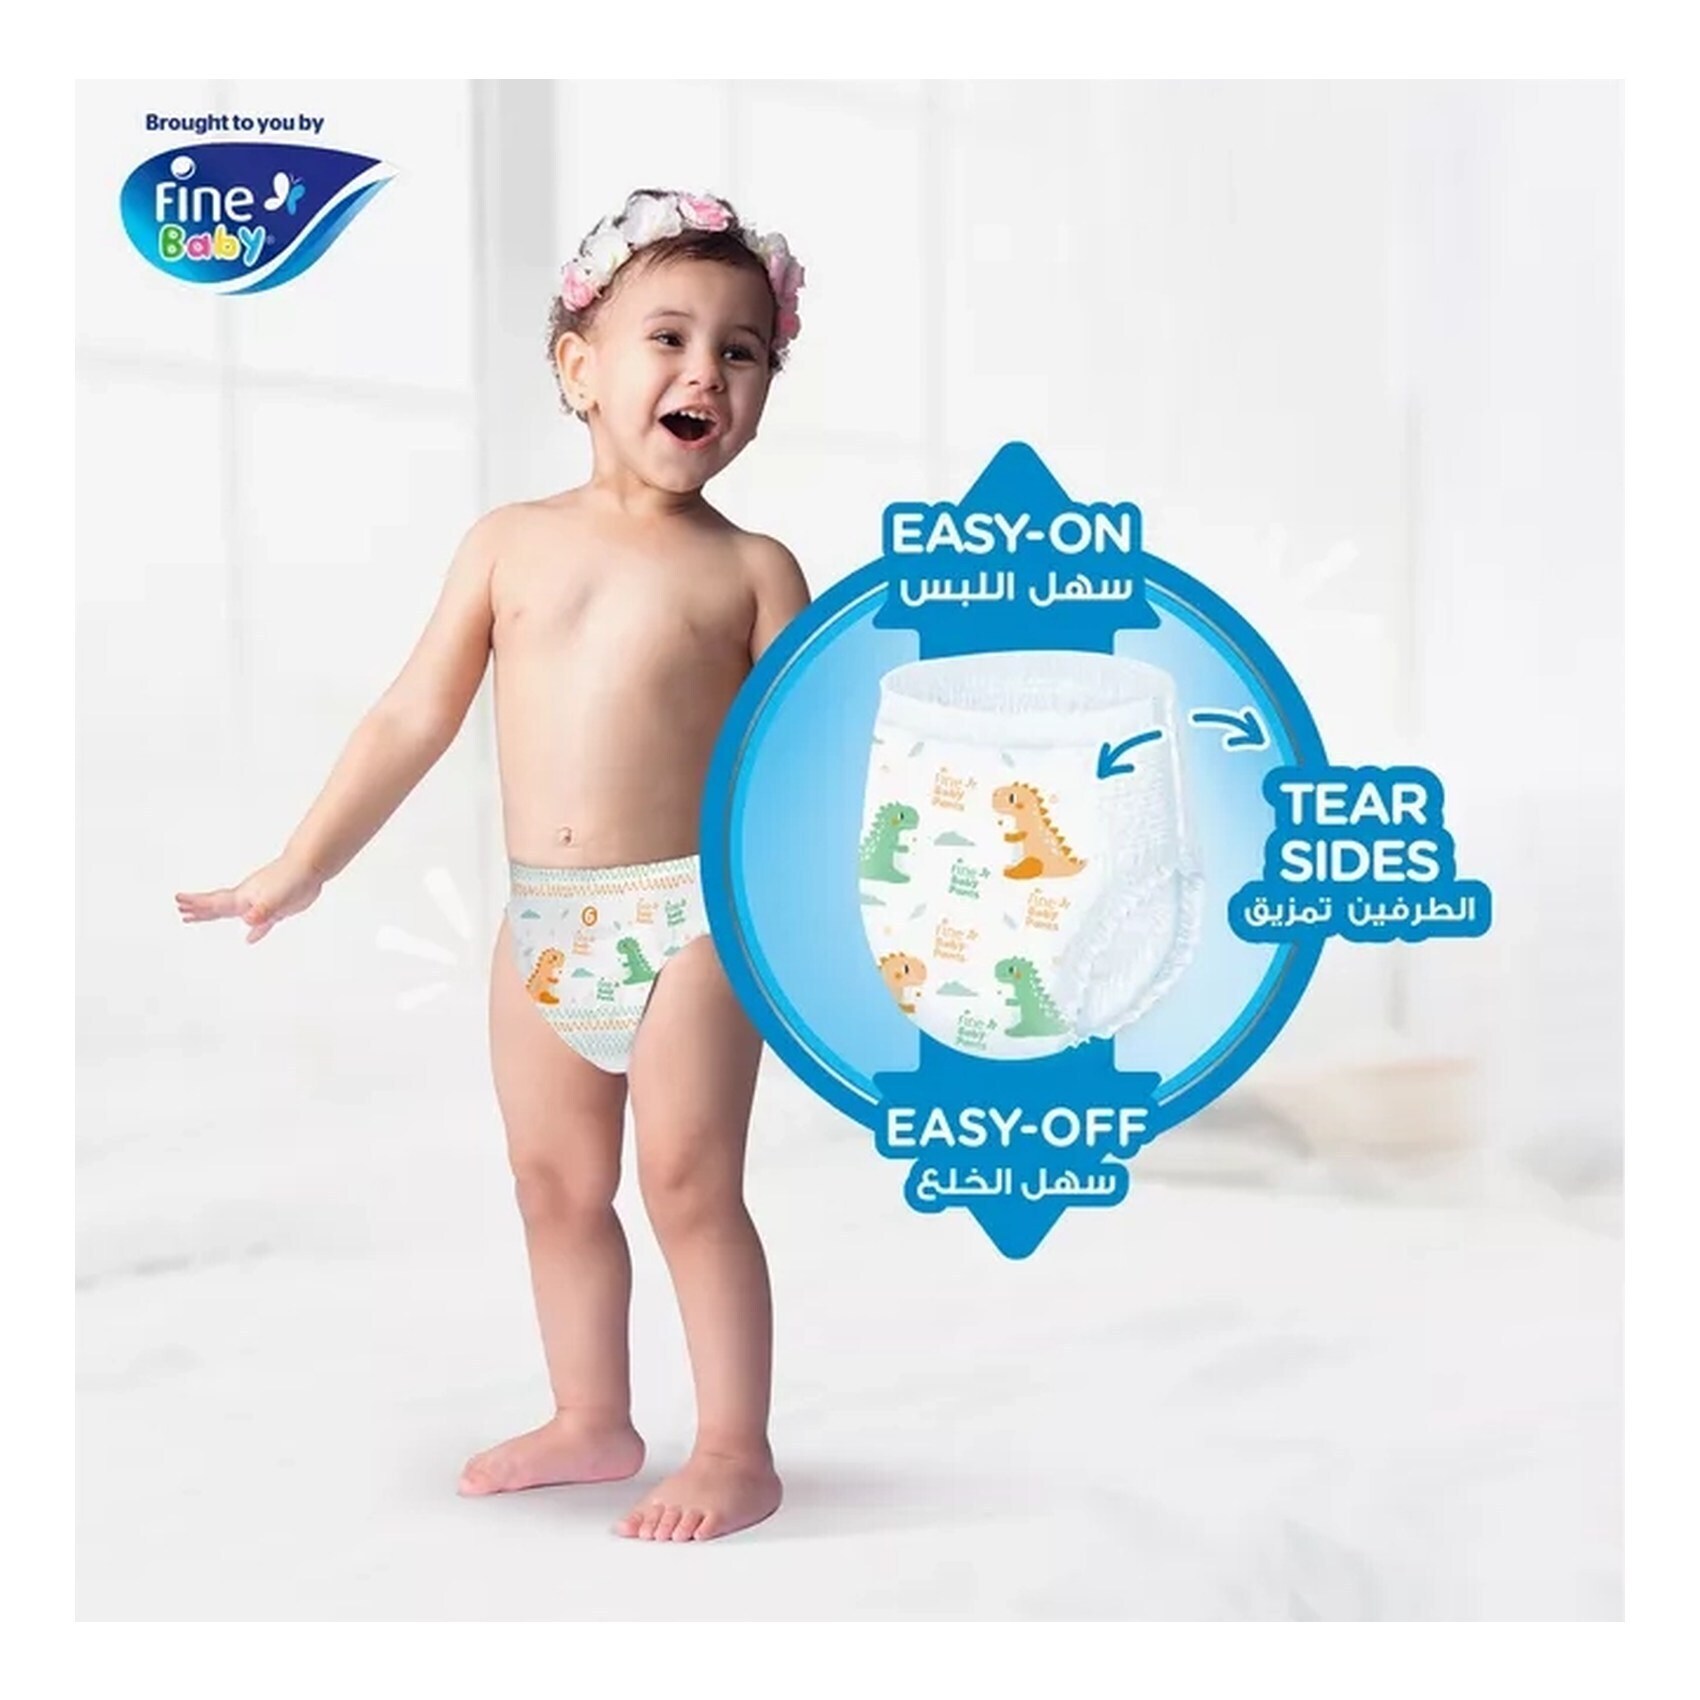 Carrefour Baby Pants Talla 6 +16 kg 36 uds 36 ud